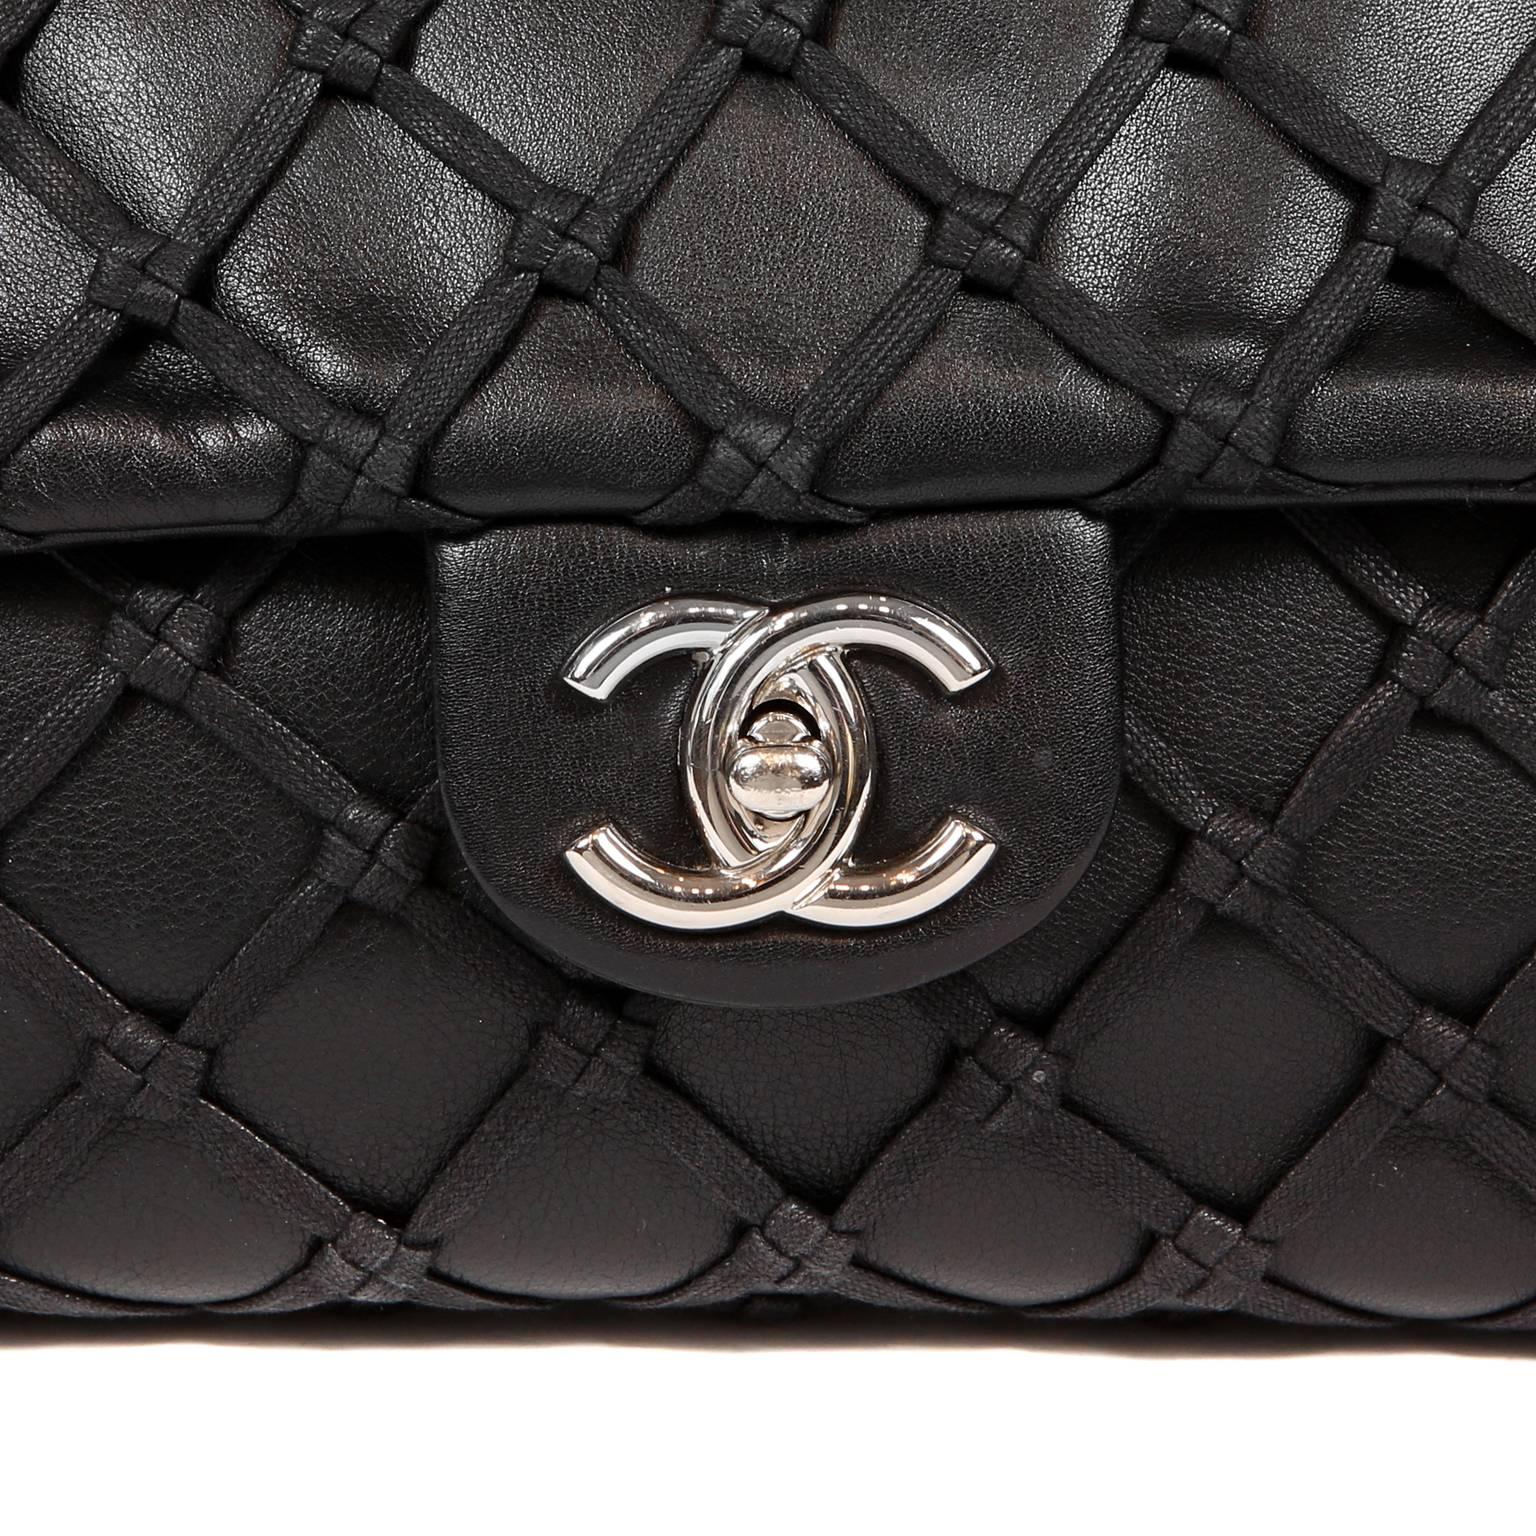 Chanel Black Leather Woven Top Stitch Classic Flap Bag 2